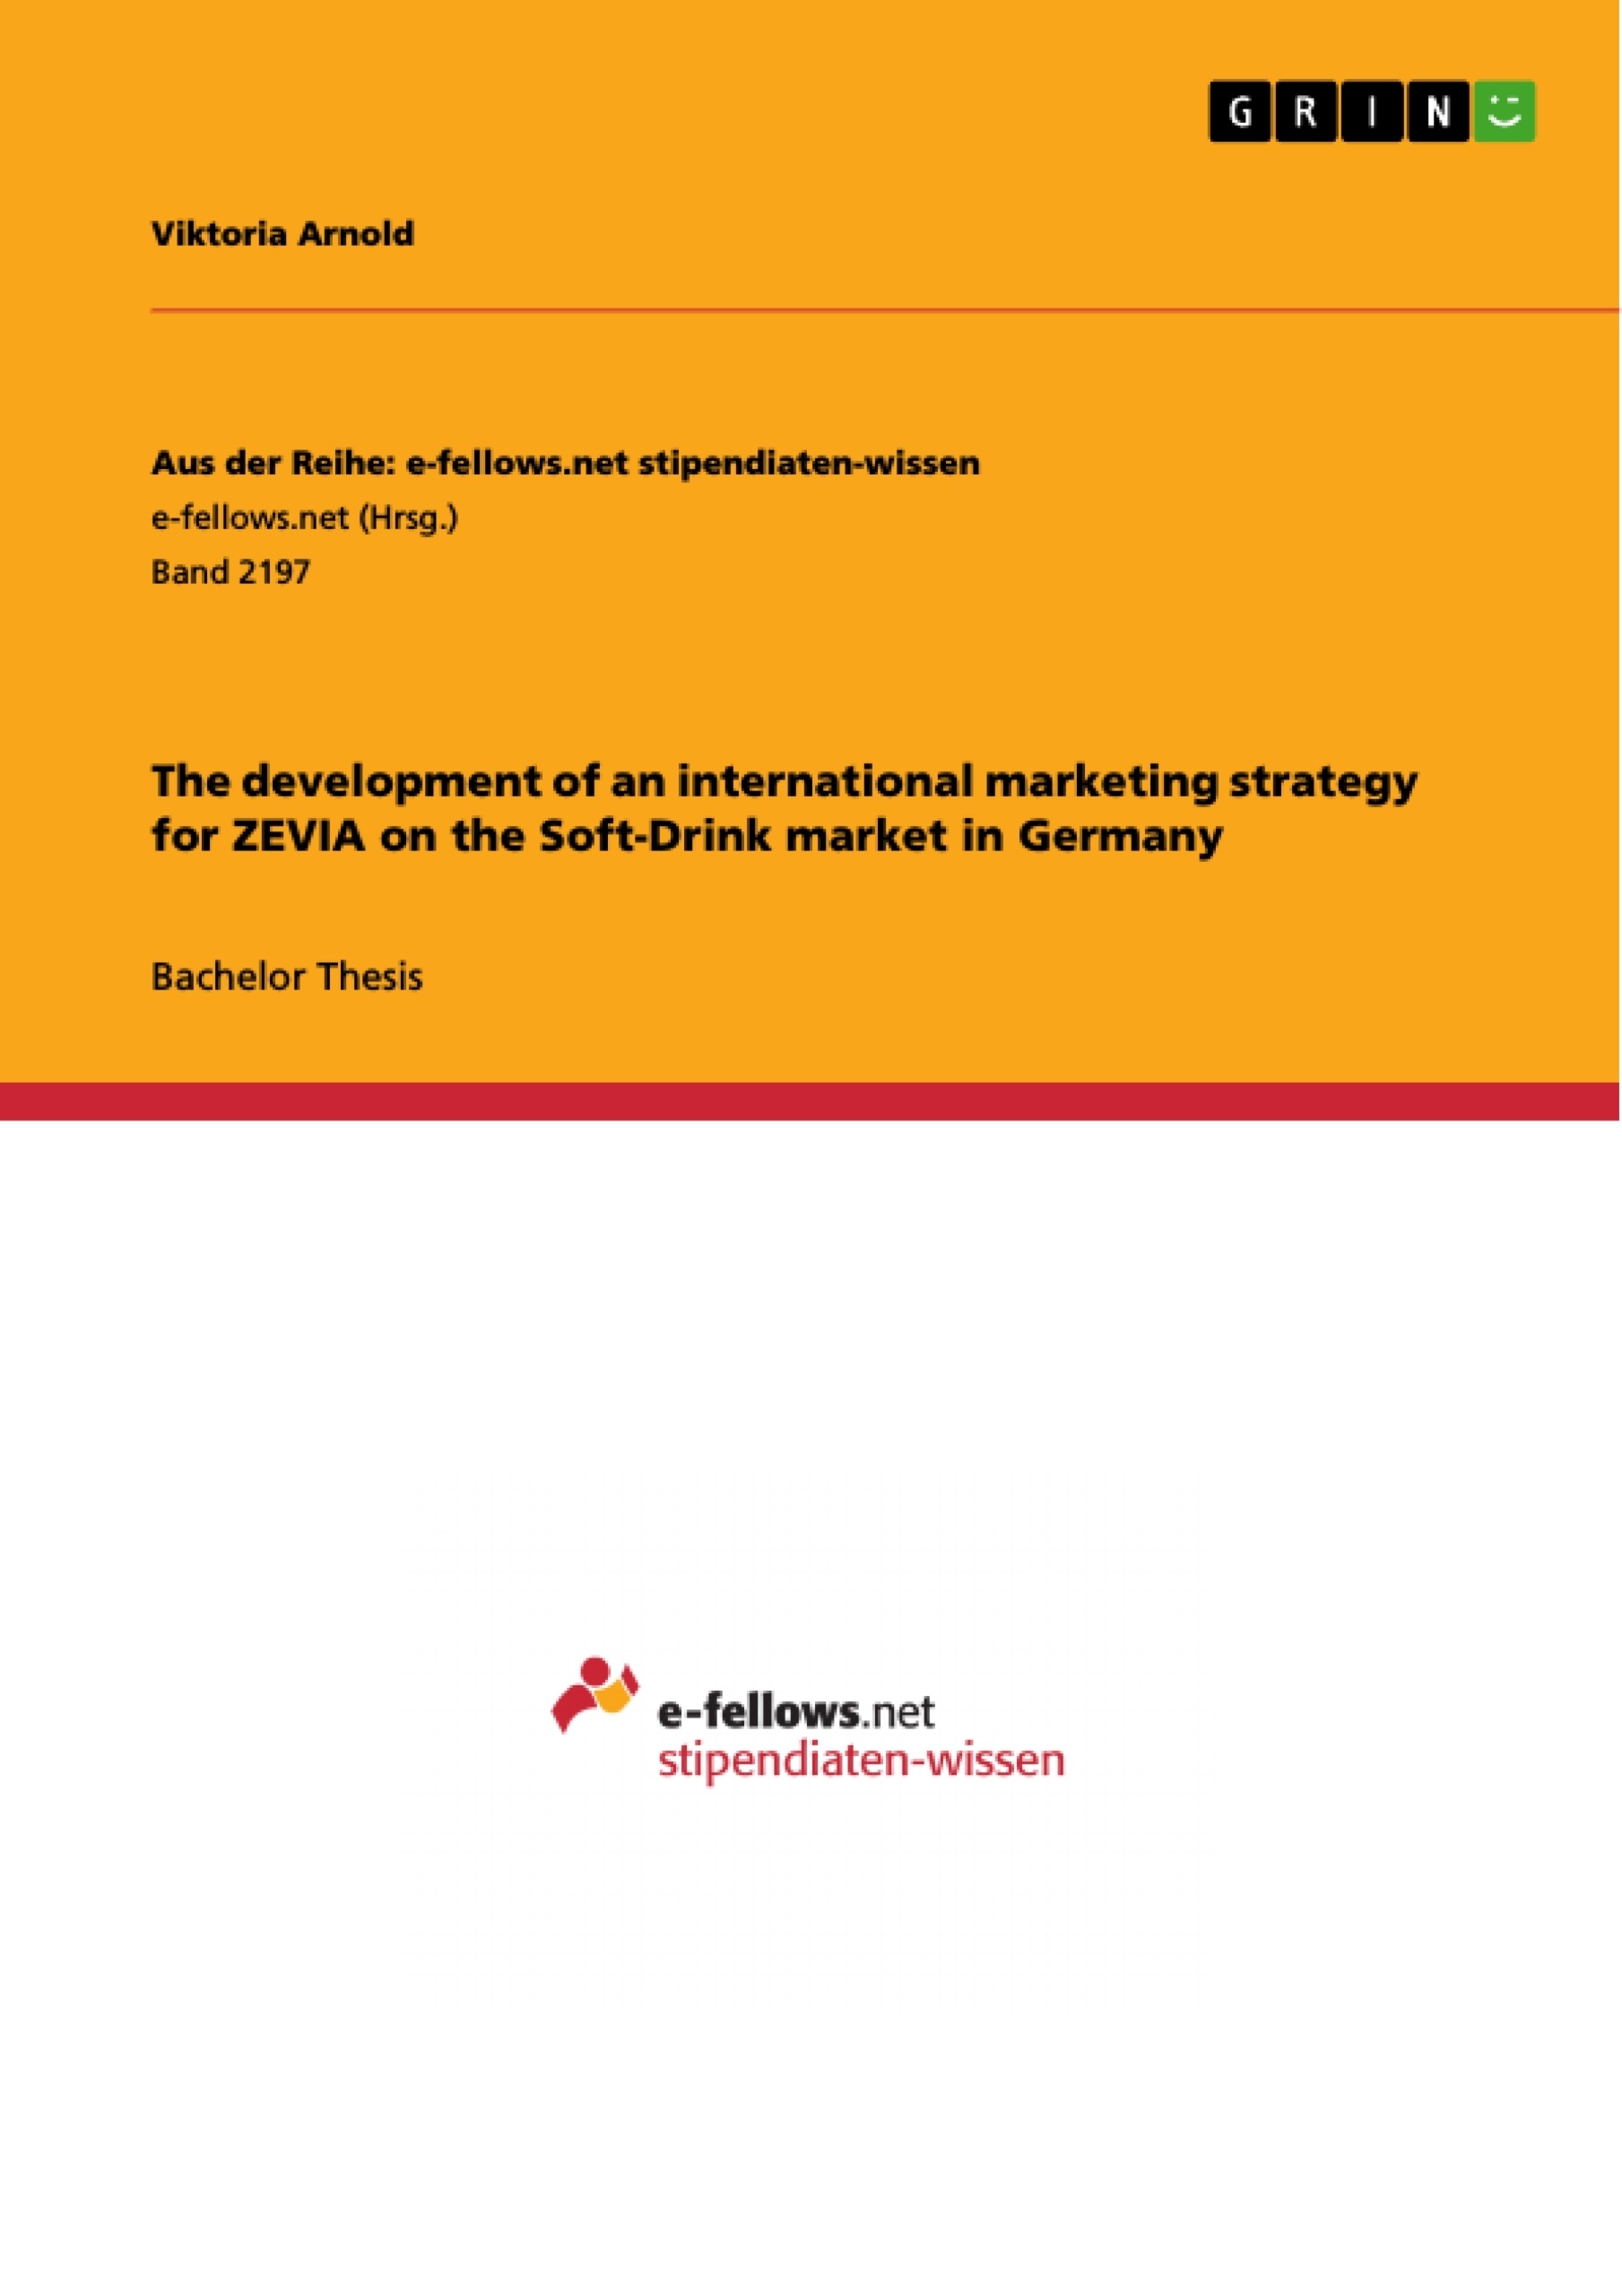 Título: The development of an international marketing strategy for ZEVIA on the Soft-Drink market in Germany